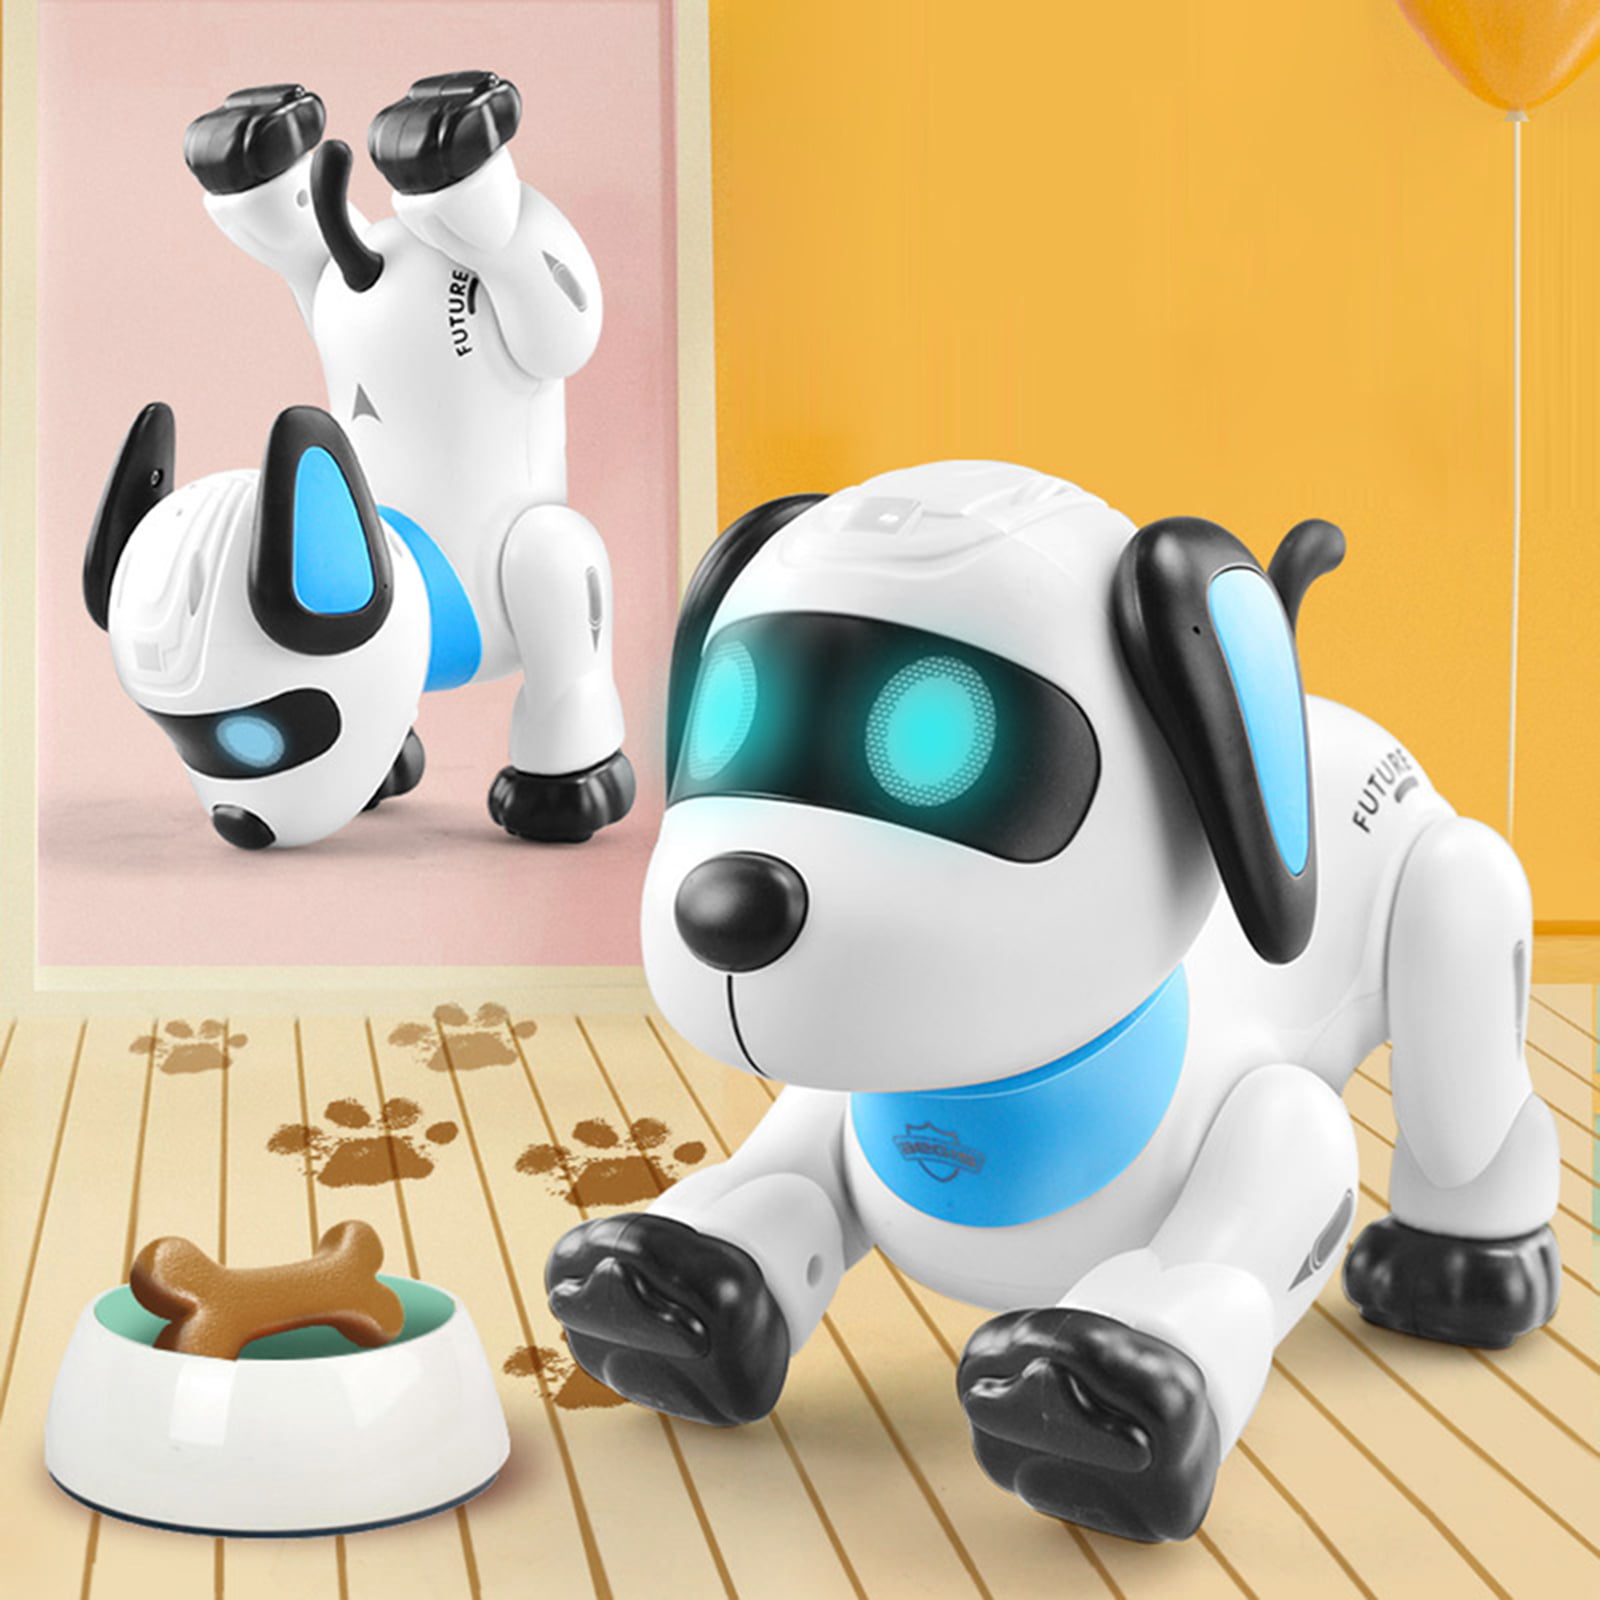 Dimple dimple dc13991 interactive robot puppy with wireless remote control kids  robotic toy electronic pet rc animal dog toy #1 for